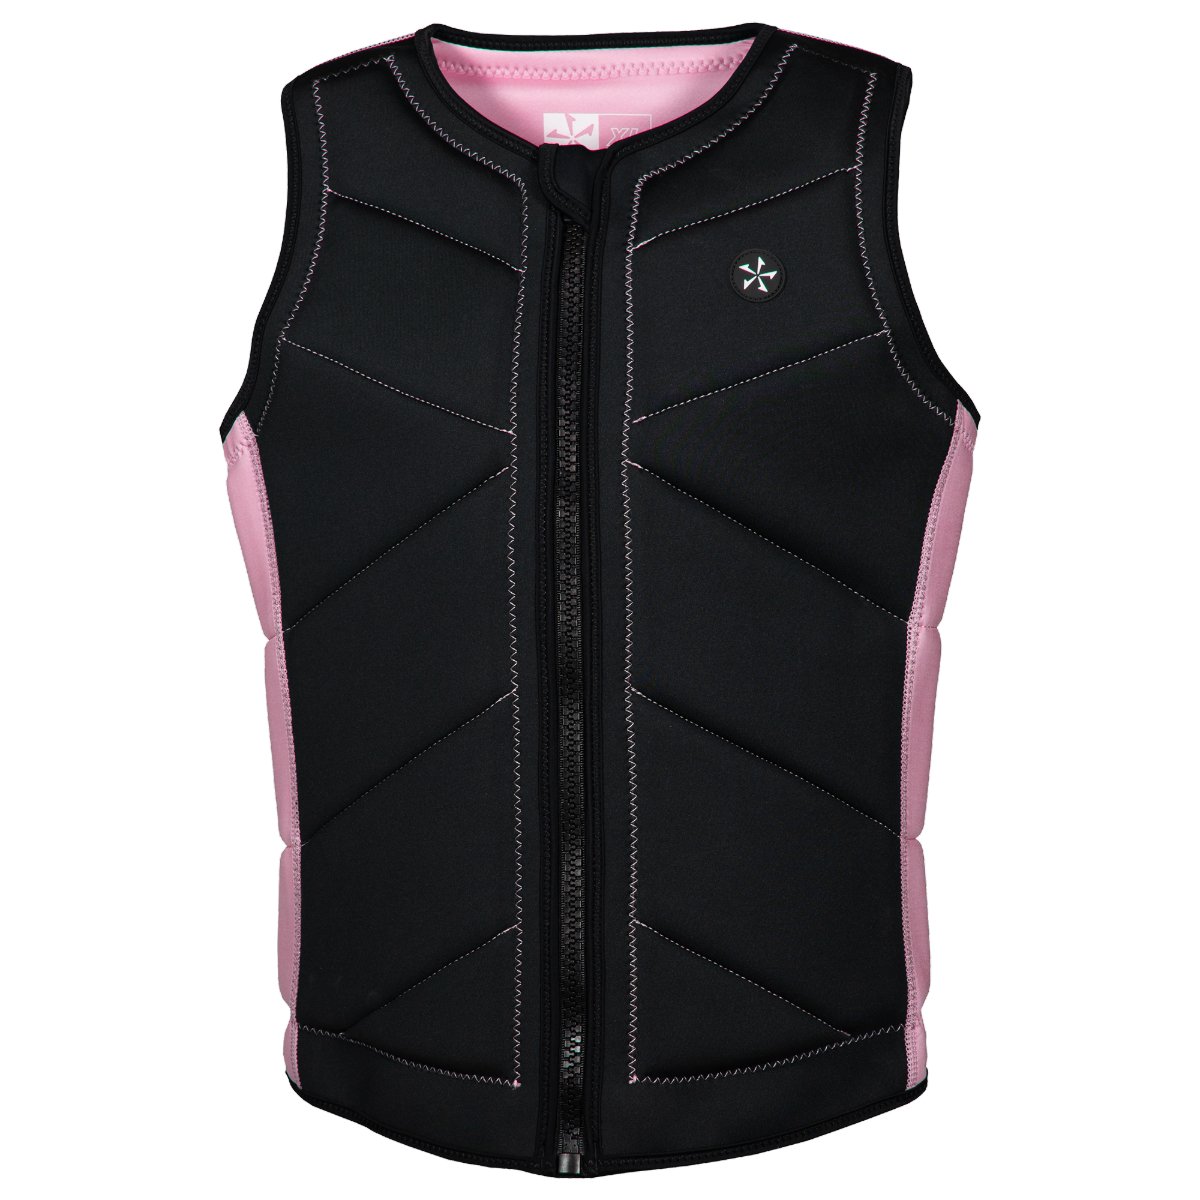 Phase 5 Ladies Pro Comp Wake Vest in Pink - BoardCo